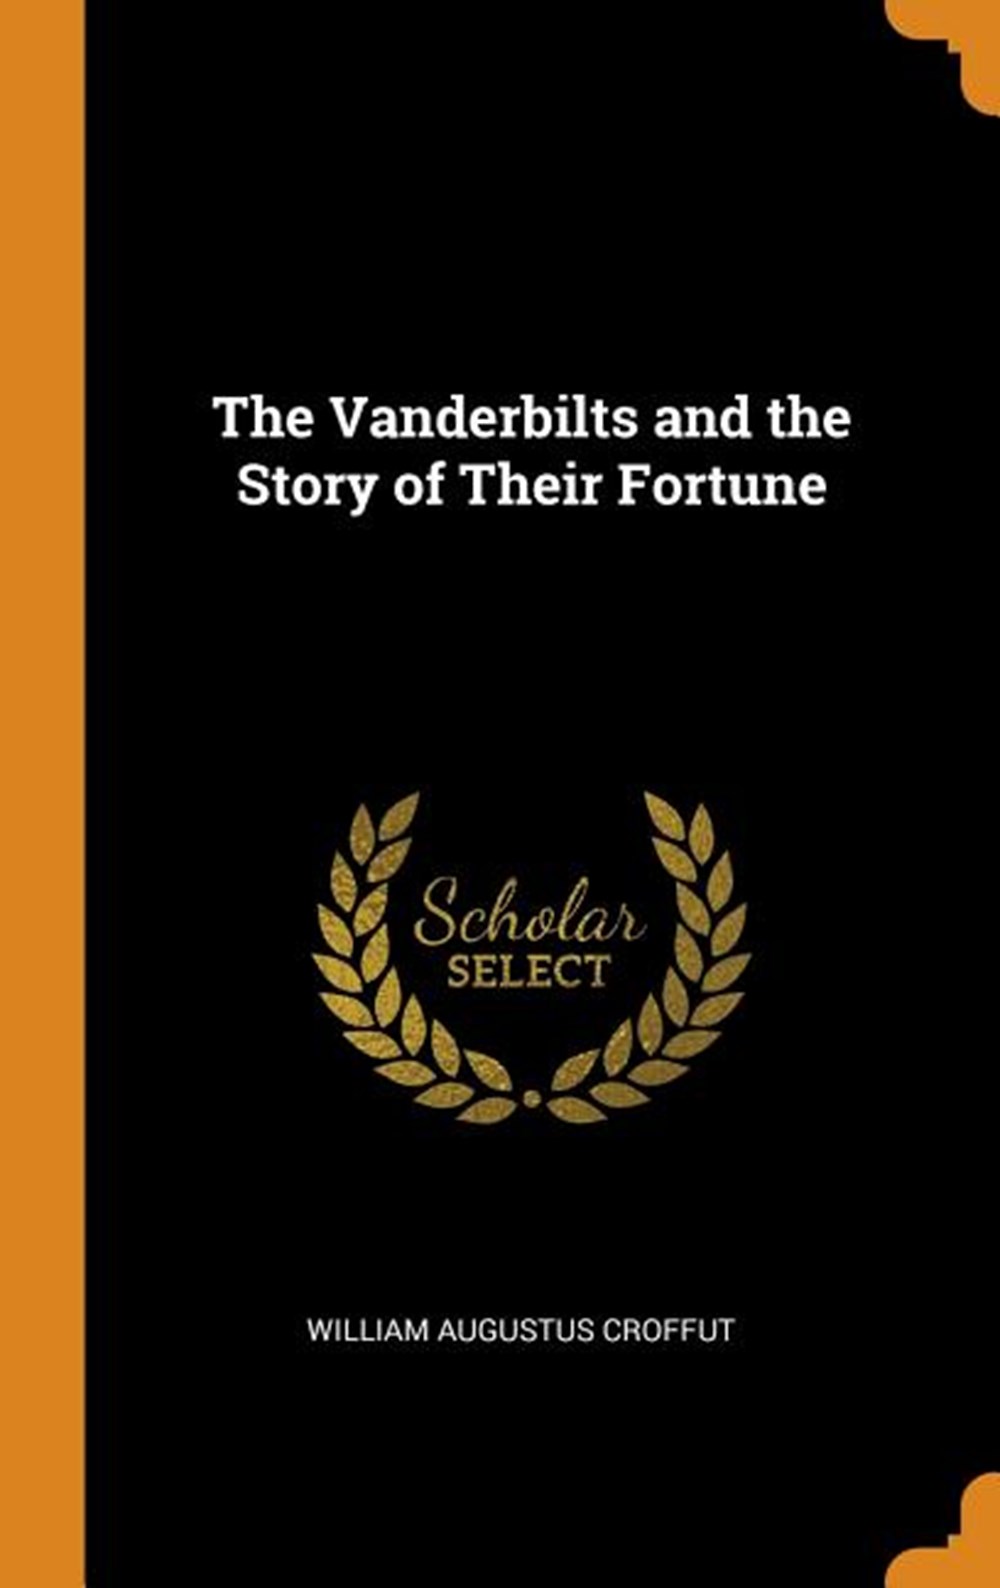 Vanderbilts and the Story of Their Fortune